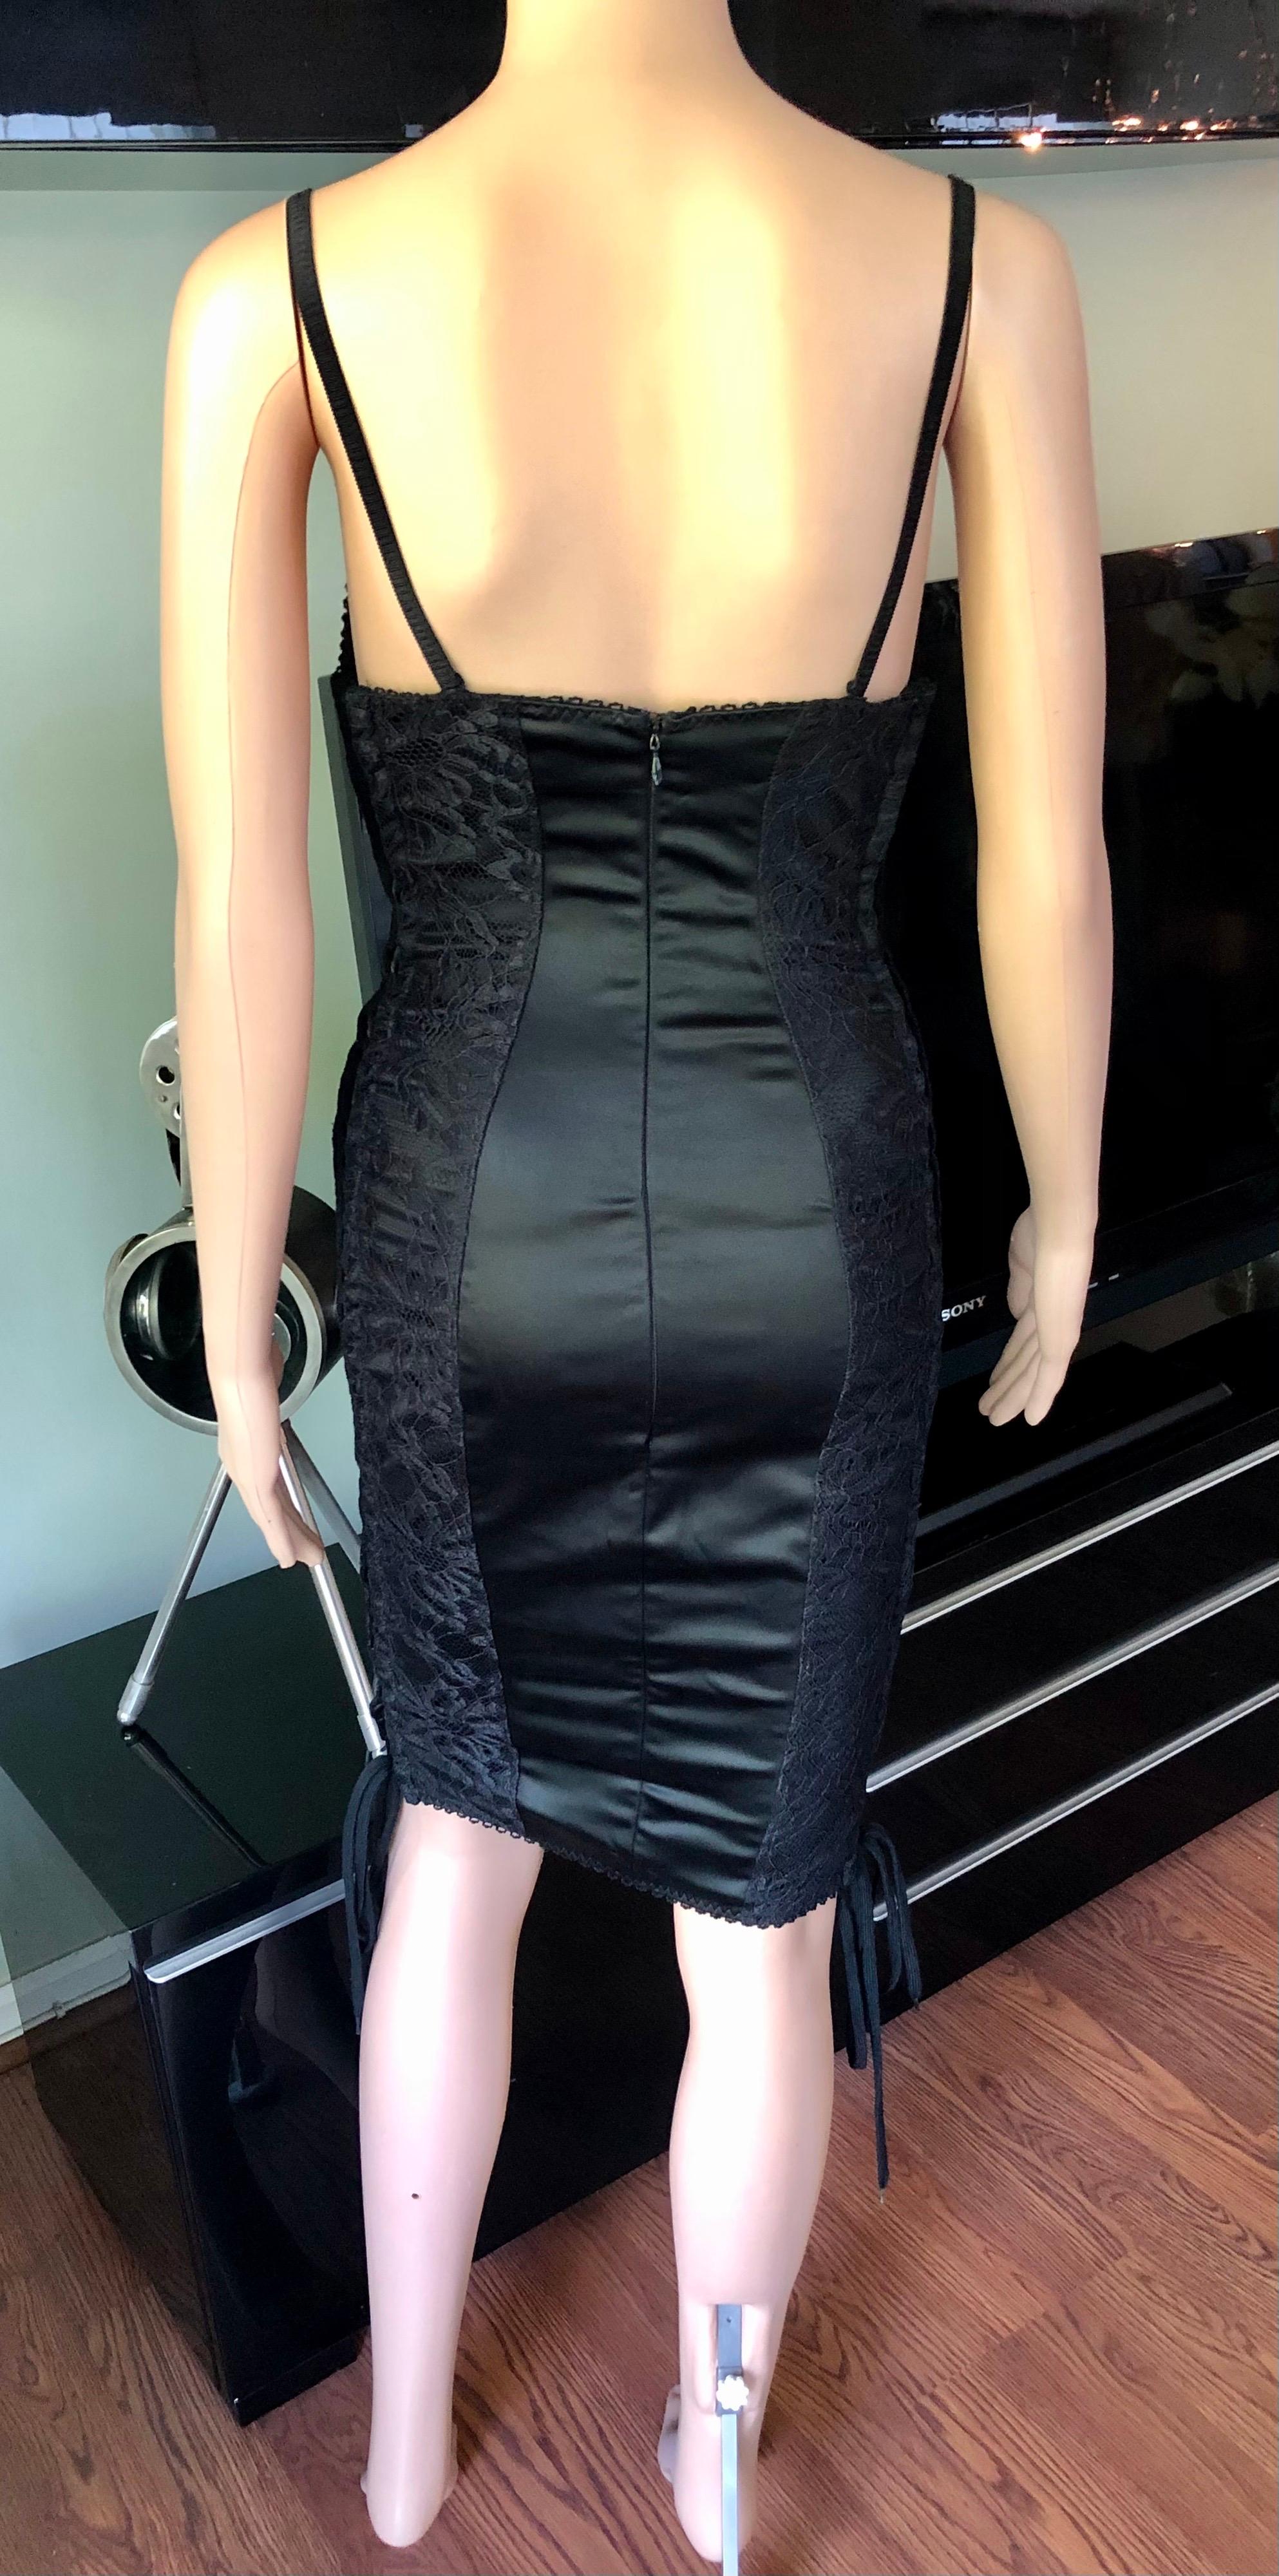 D&G by Dolce & Gabbana Lace Up Bodycon Black Dress In Good Condition For Sale In Naples, FL